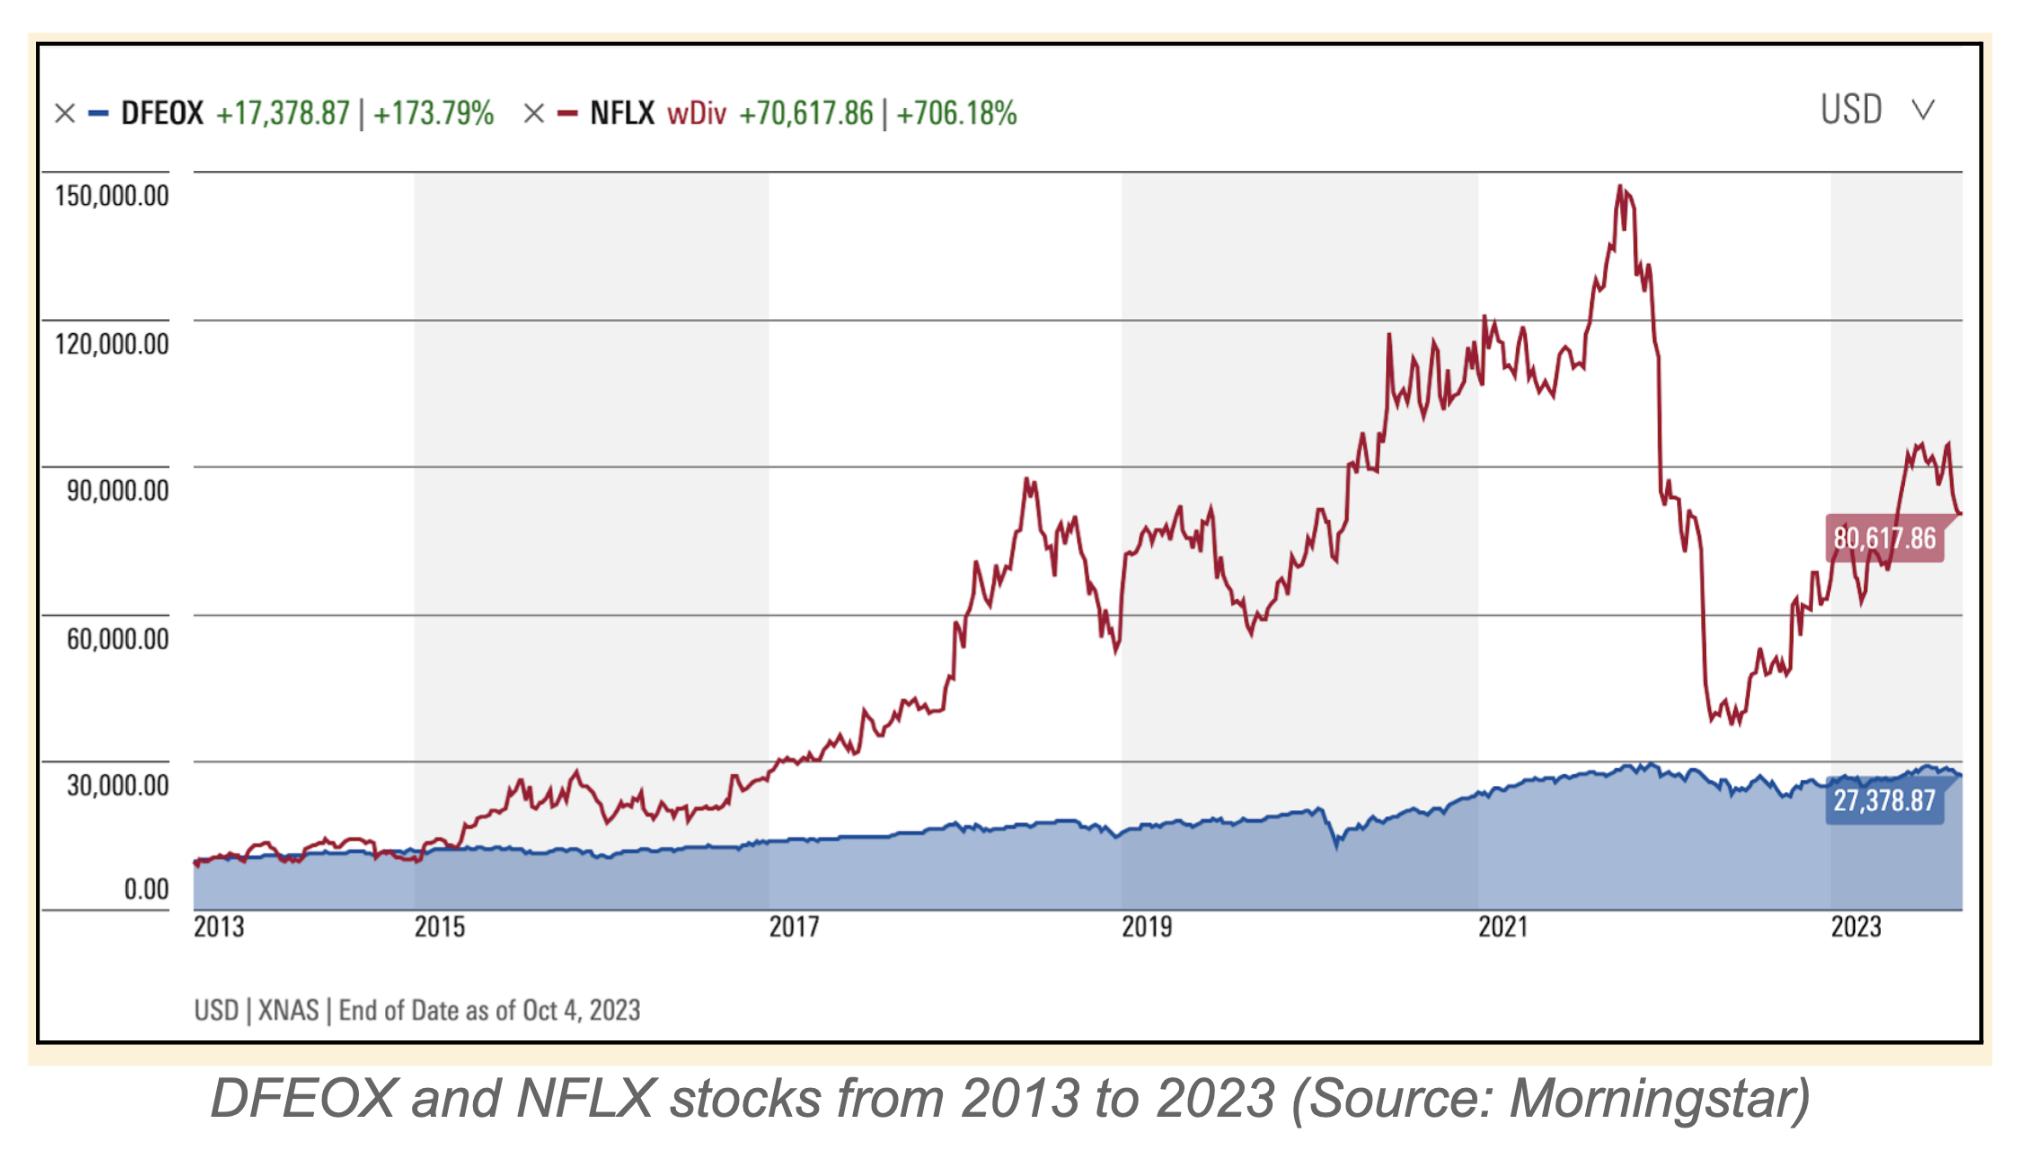 Chart comparing diversified DFEOX and concentrated NFLX stock performance from 2013 to 2023